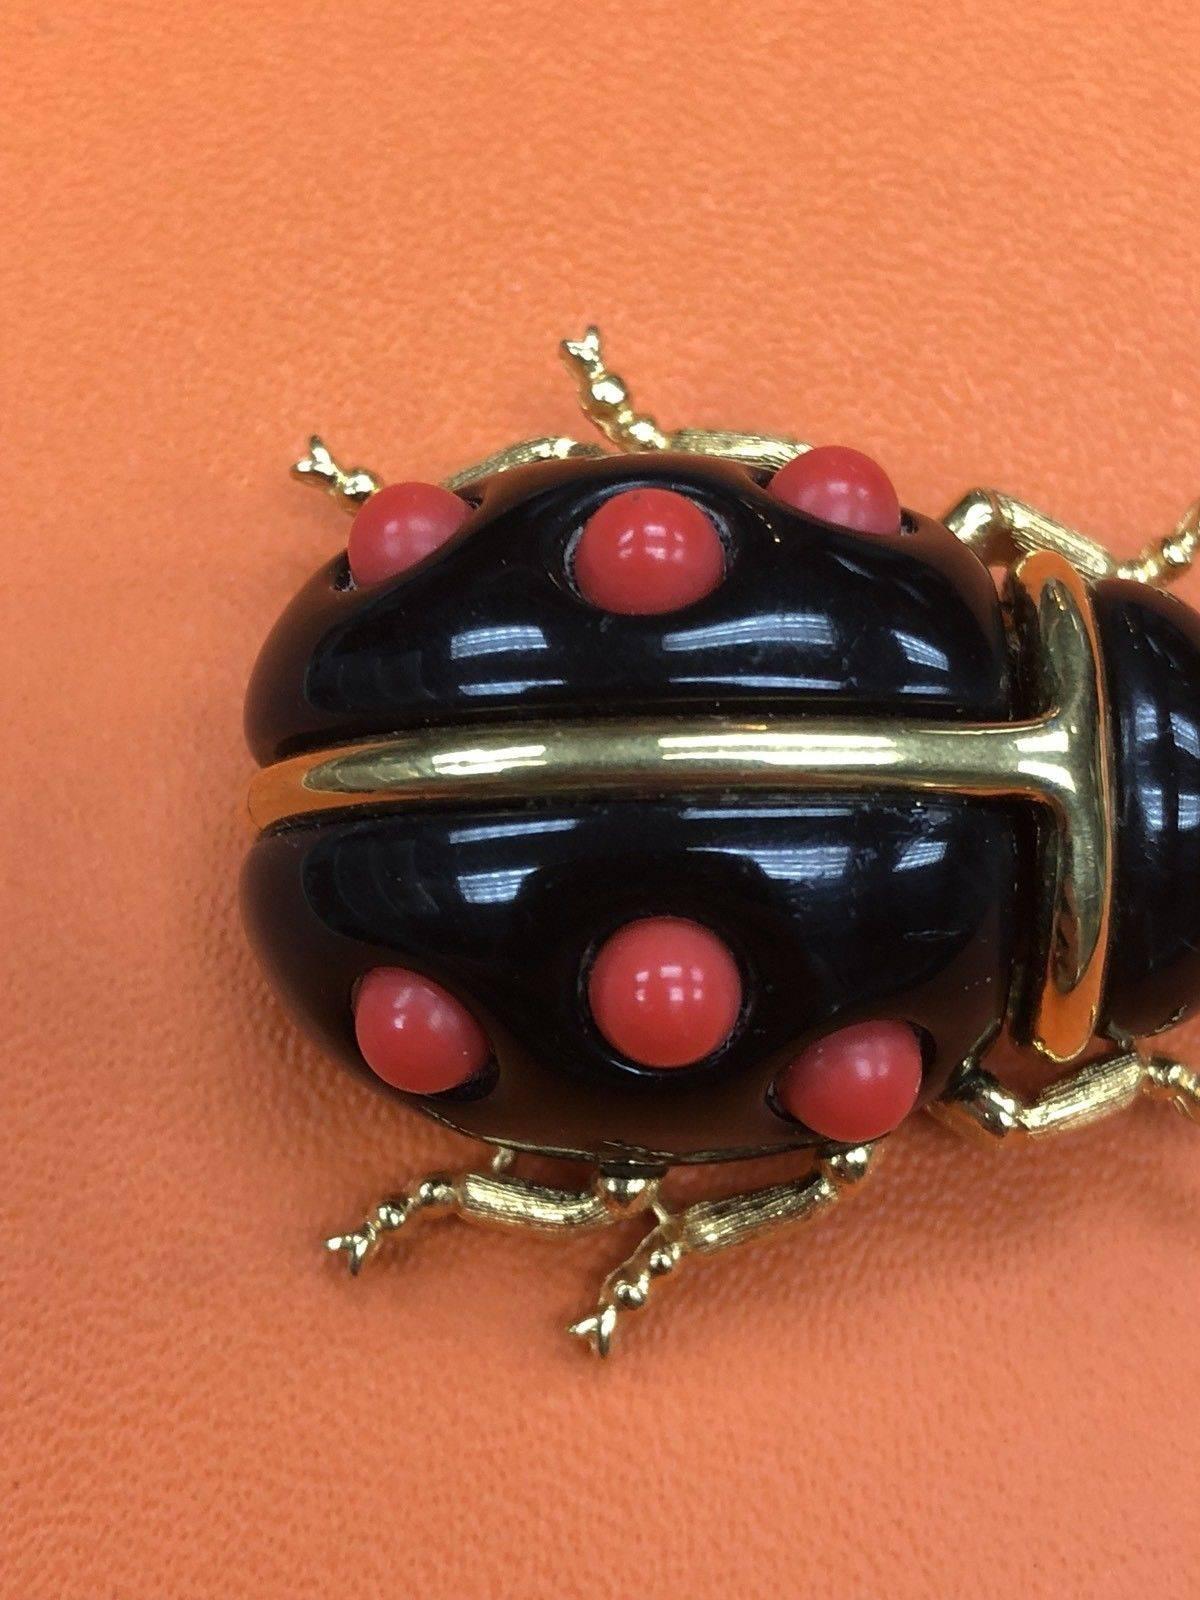 Delightful Ladybug brooch adorned with Faux Coral; signed on reverse: KJL; measures approx. 1.75